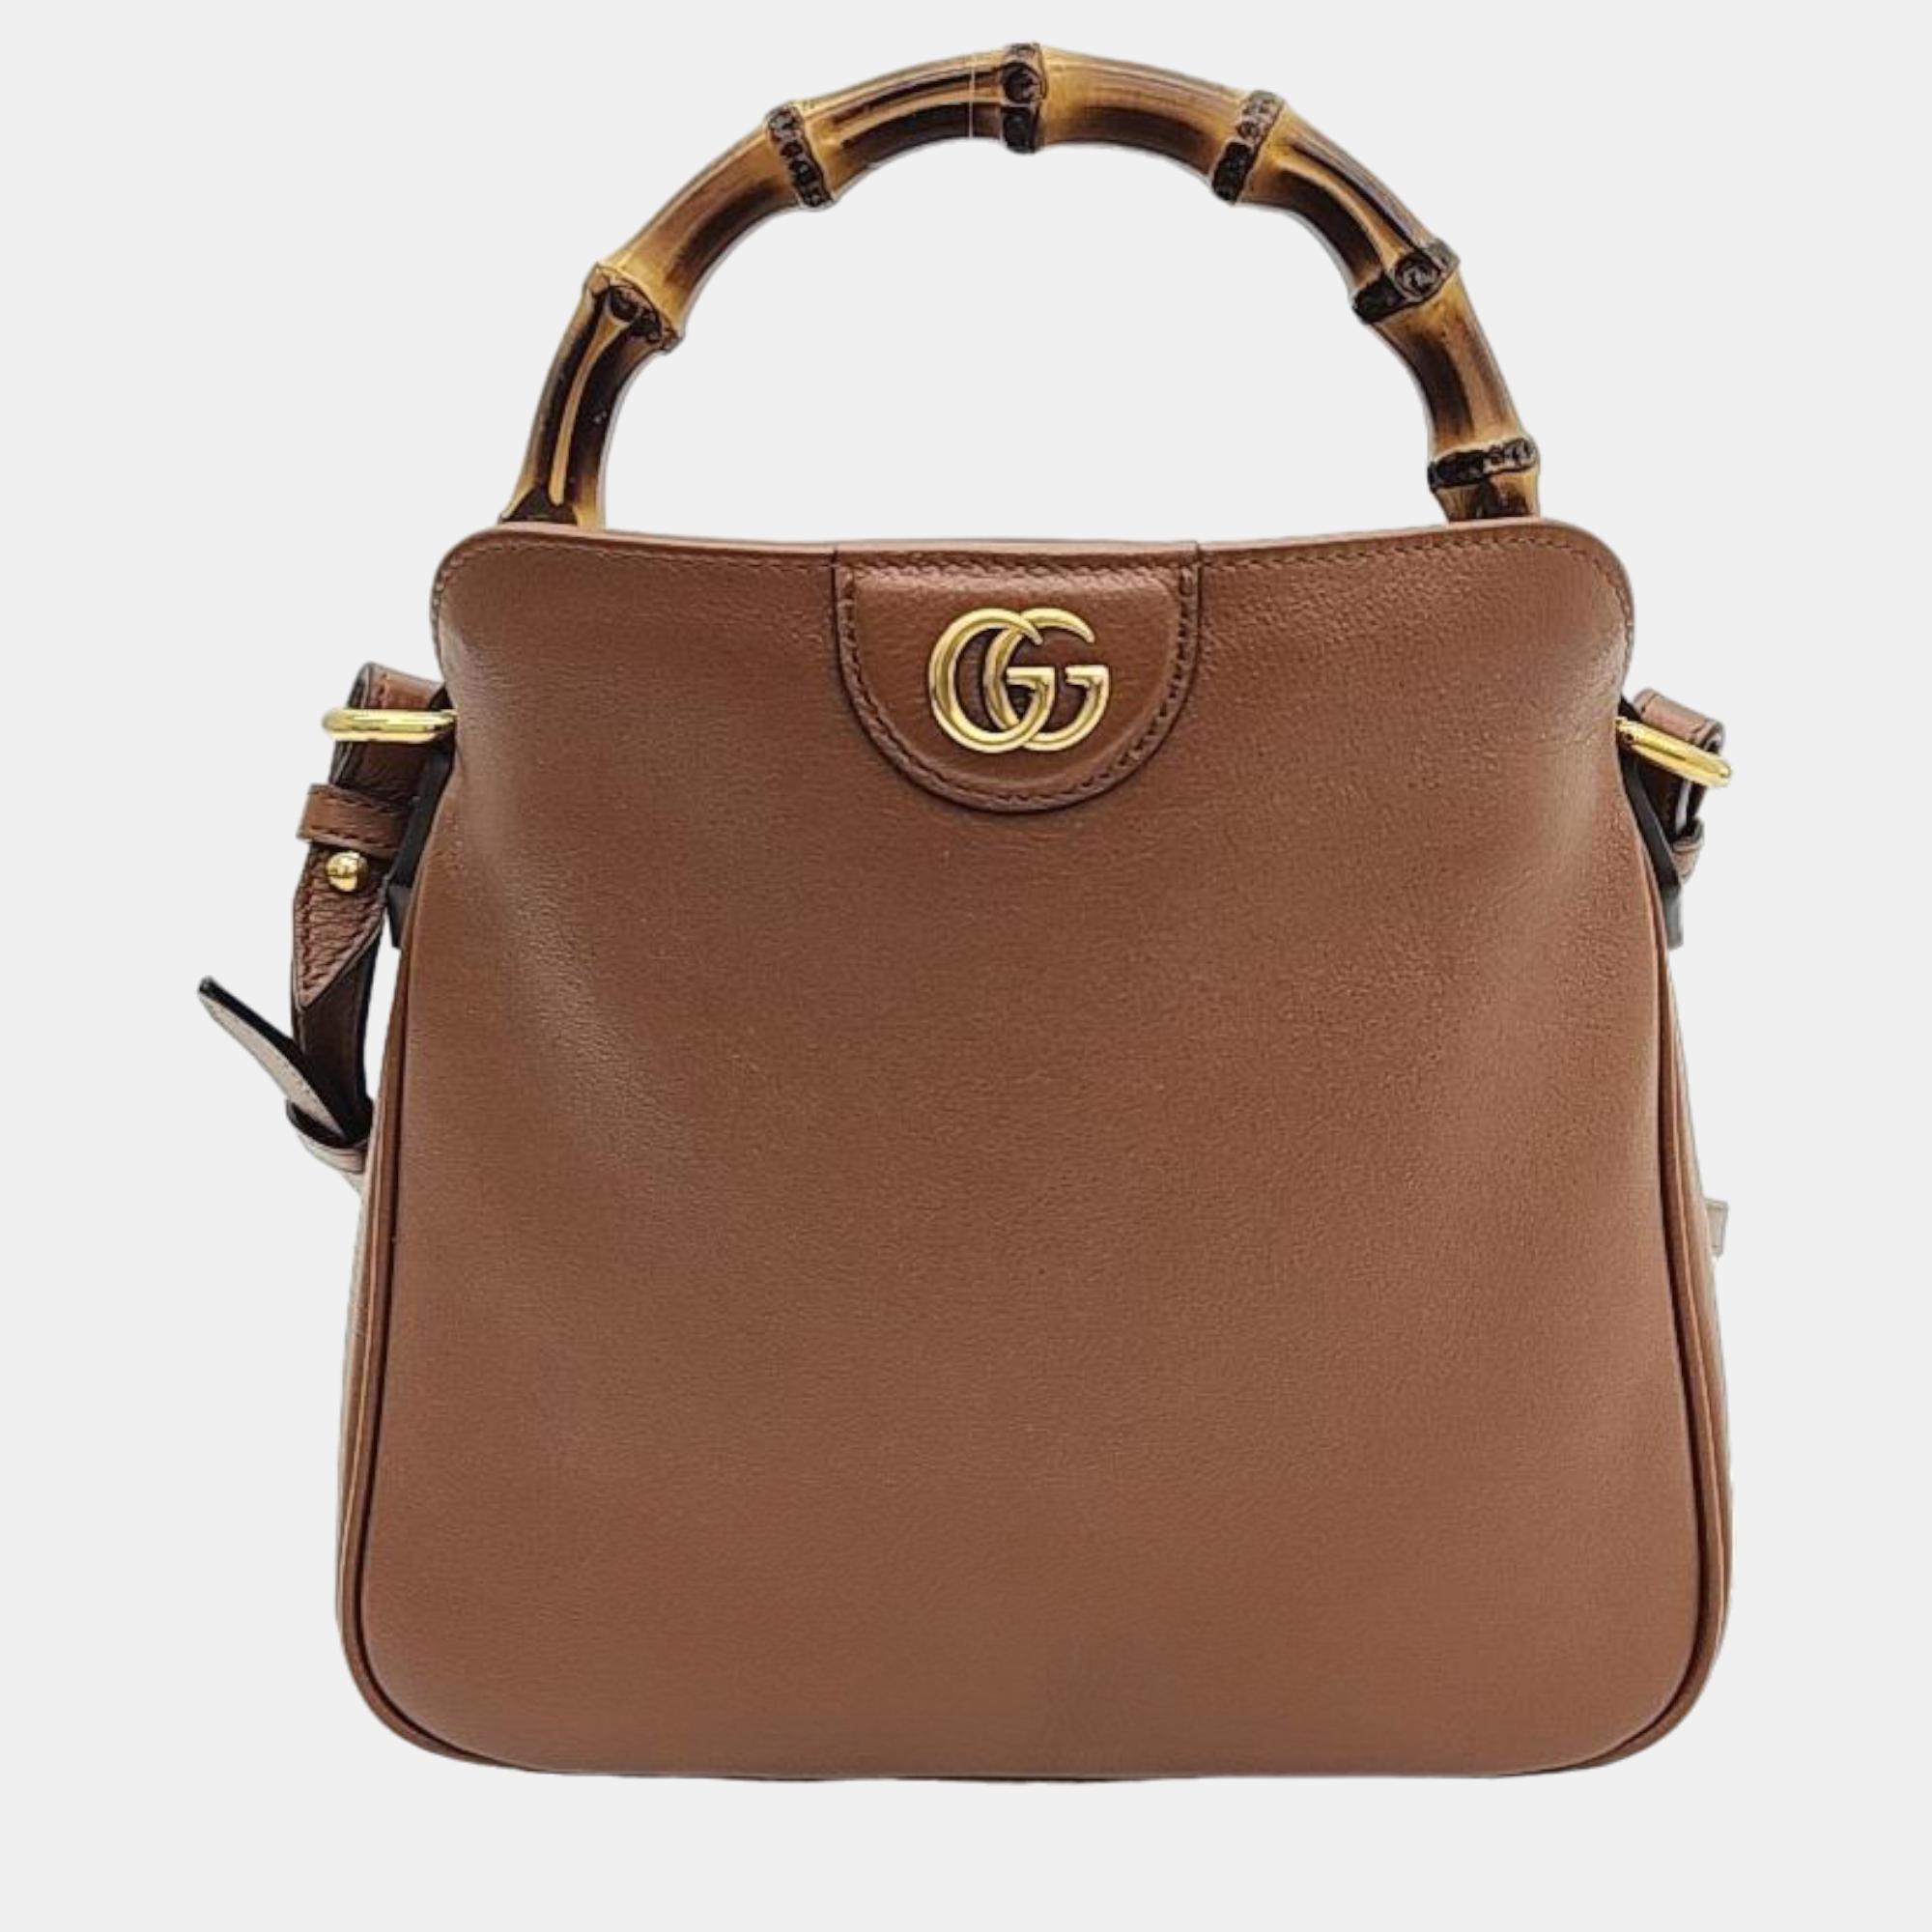 Gucci Brown Leather Diana Small Shoulder Bag (746251)